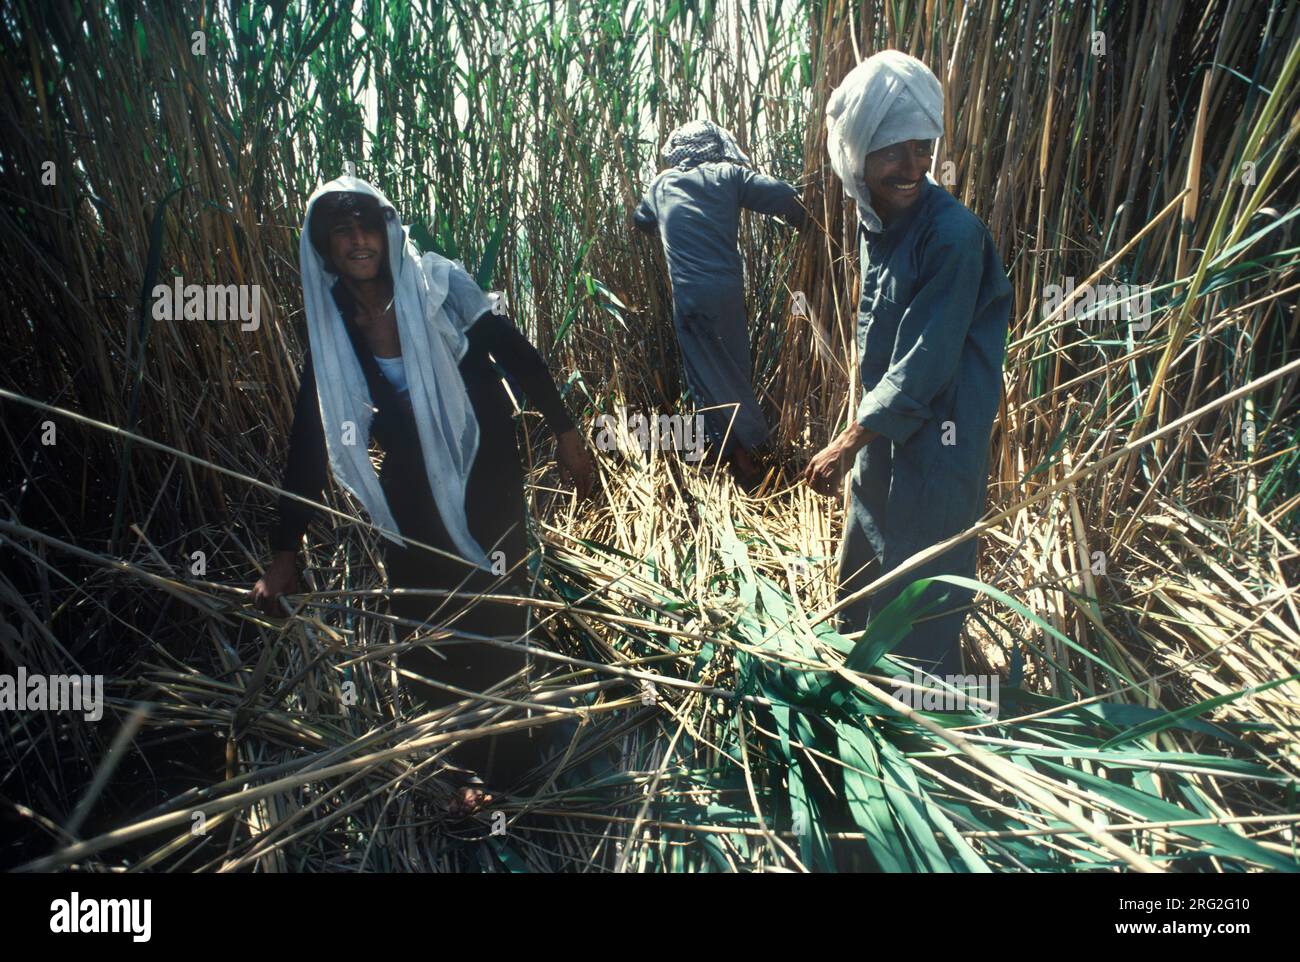 Marsh Arabs Iraq. Marsh Arab men cutting reeds used for building and feeding cattle. Rivers Tigris and Euphrates wetlands, Hammar marshes. Southern Iraq 1980s 1984 HOMER SYKES Stock Photo